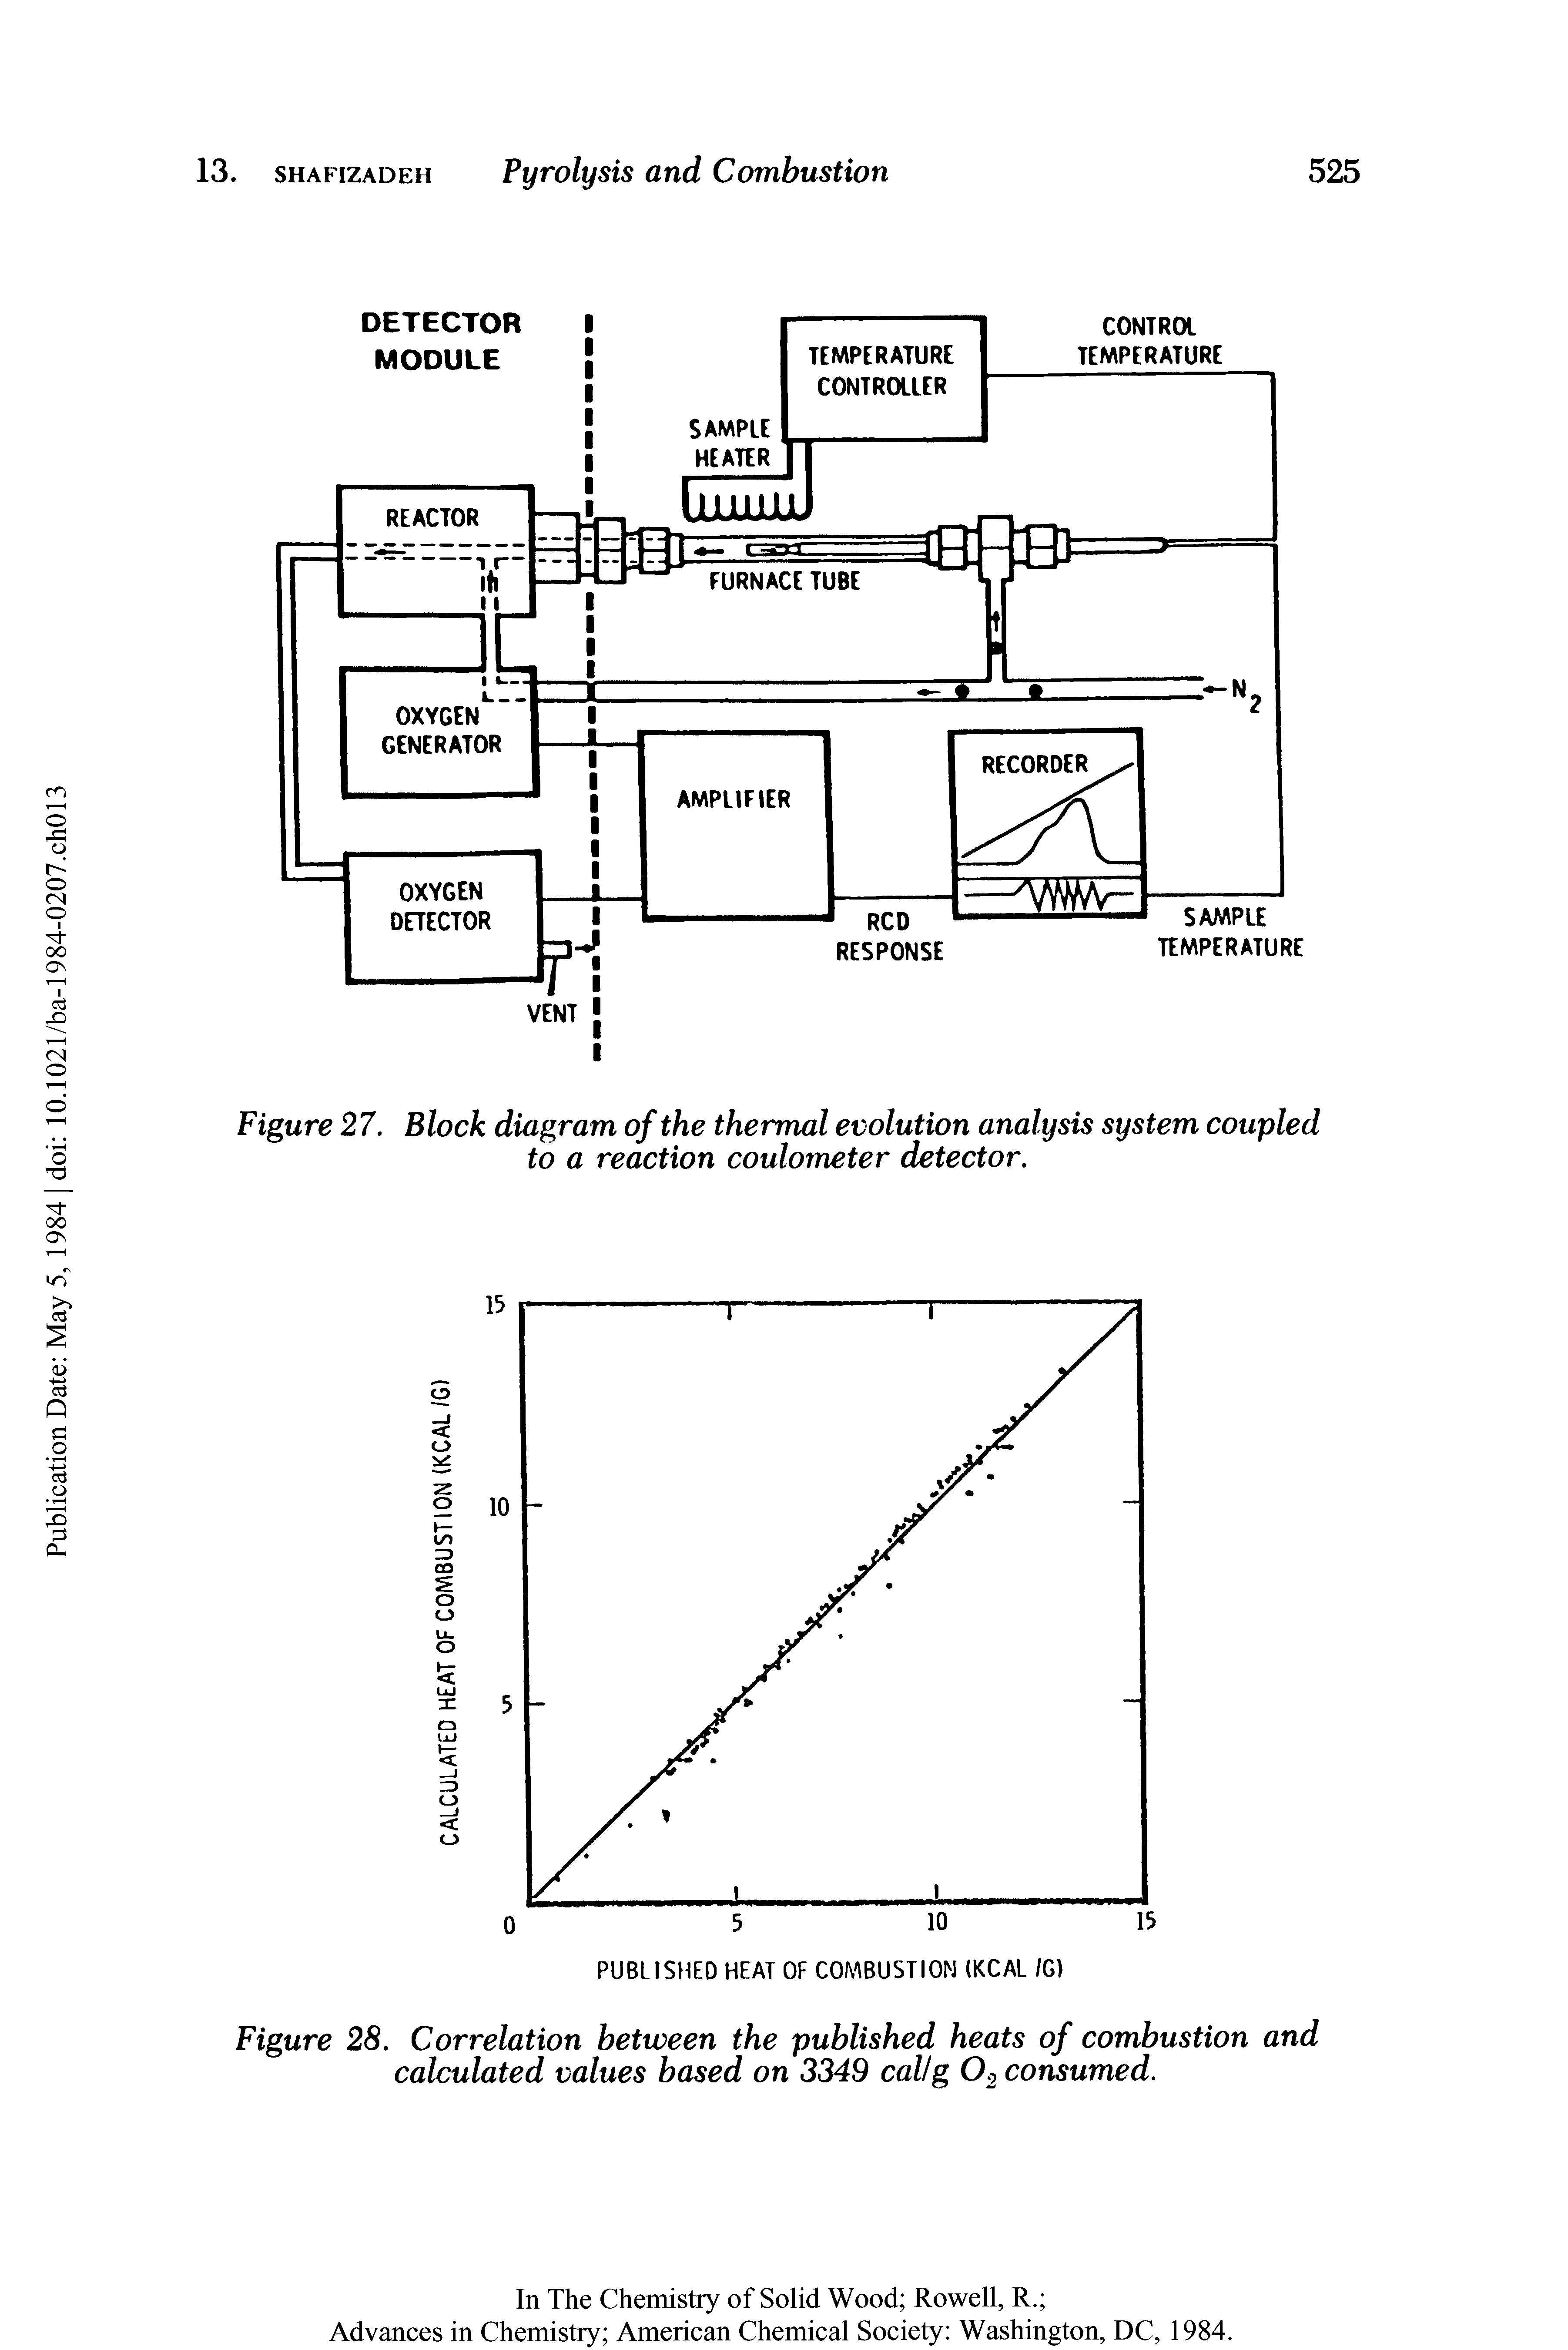 Figure 27. Block diagram of the thermal evolution analysis system coupled to a reaction coulometer detector.